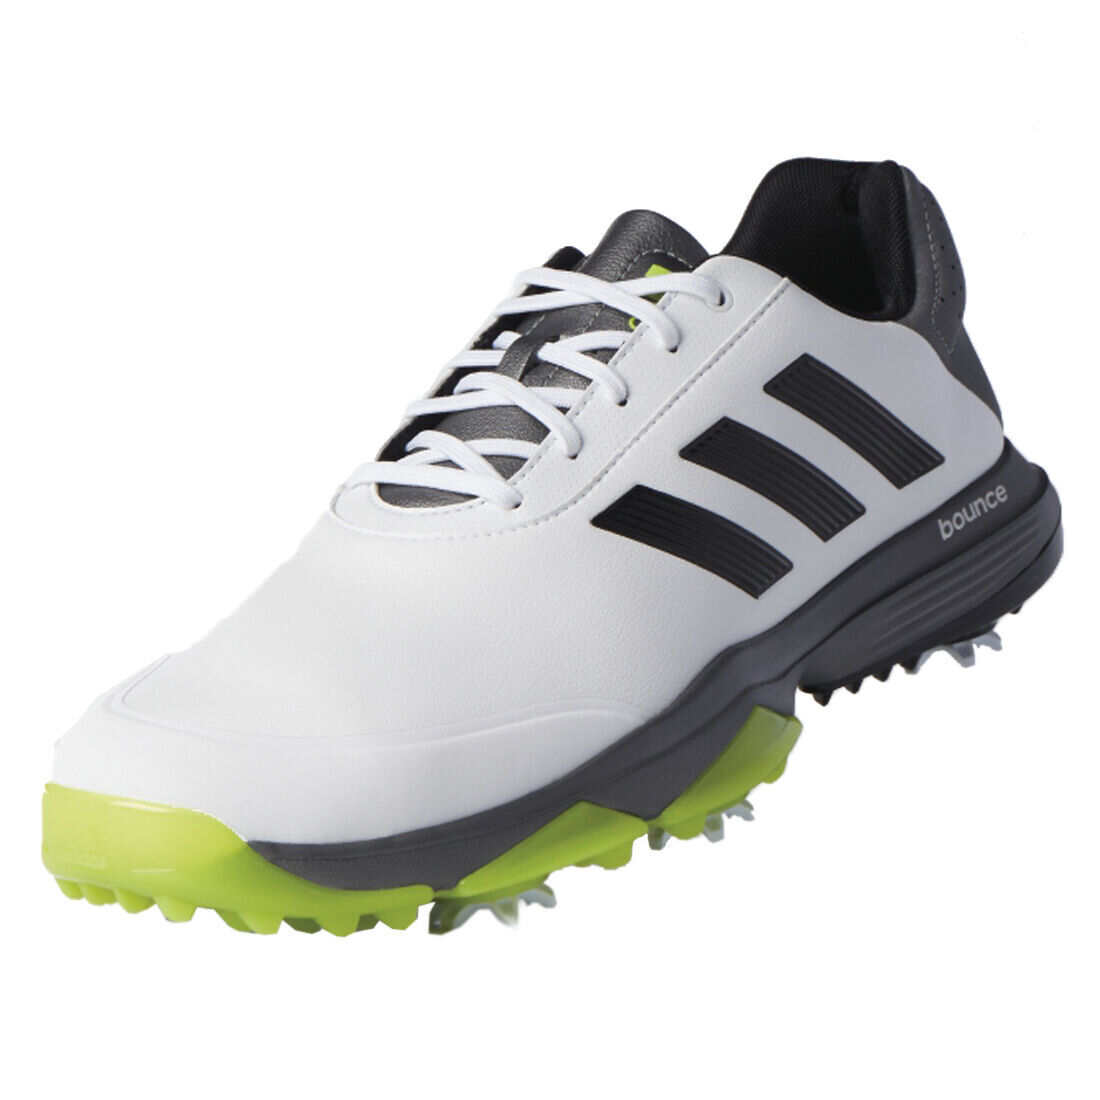 adipower s bounce golf shoes